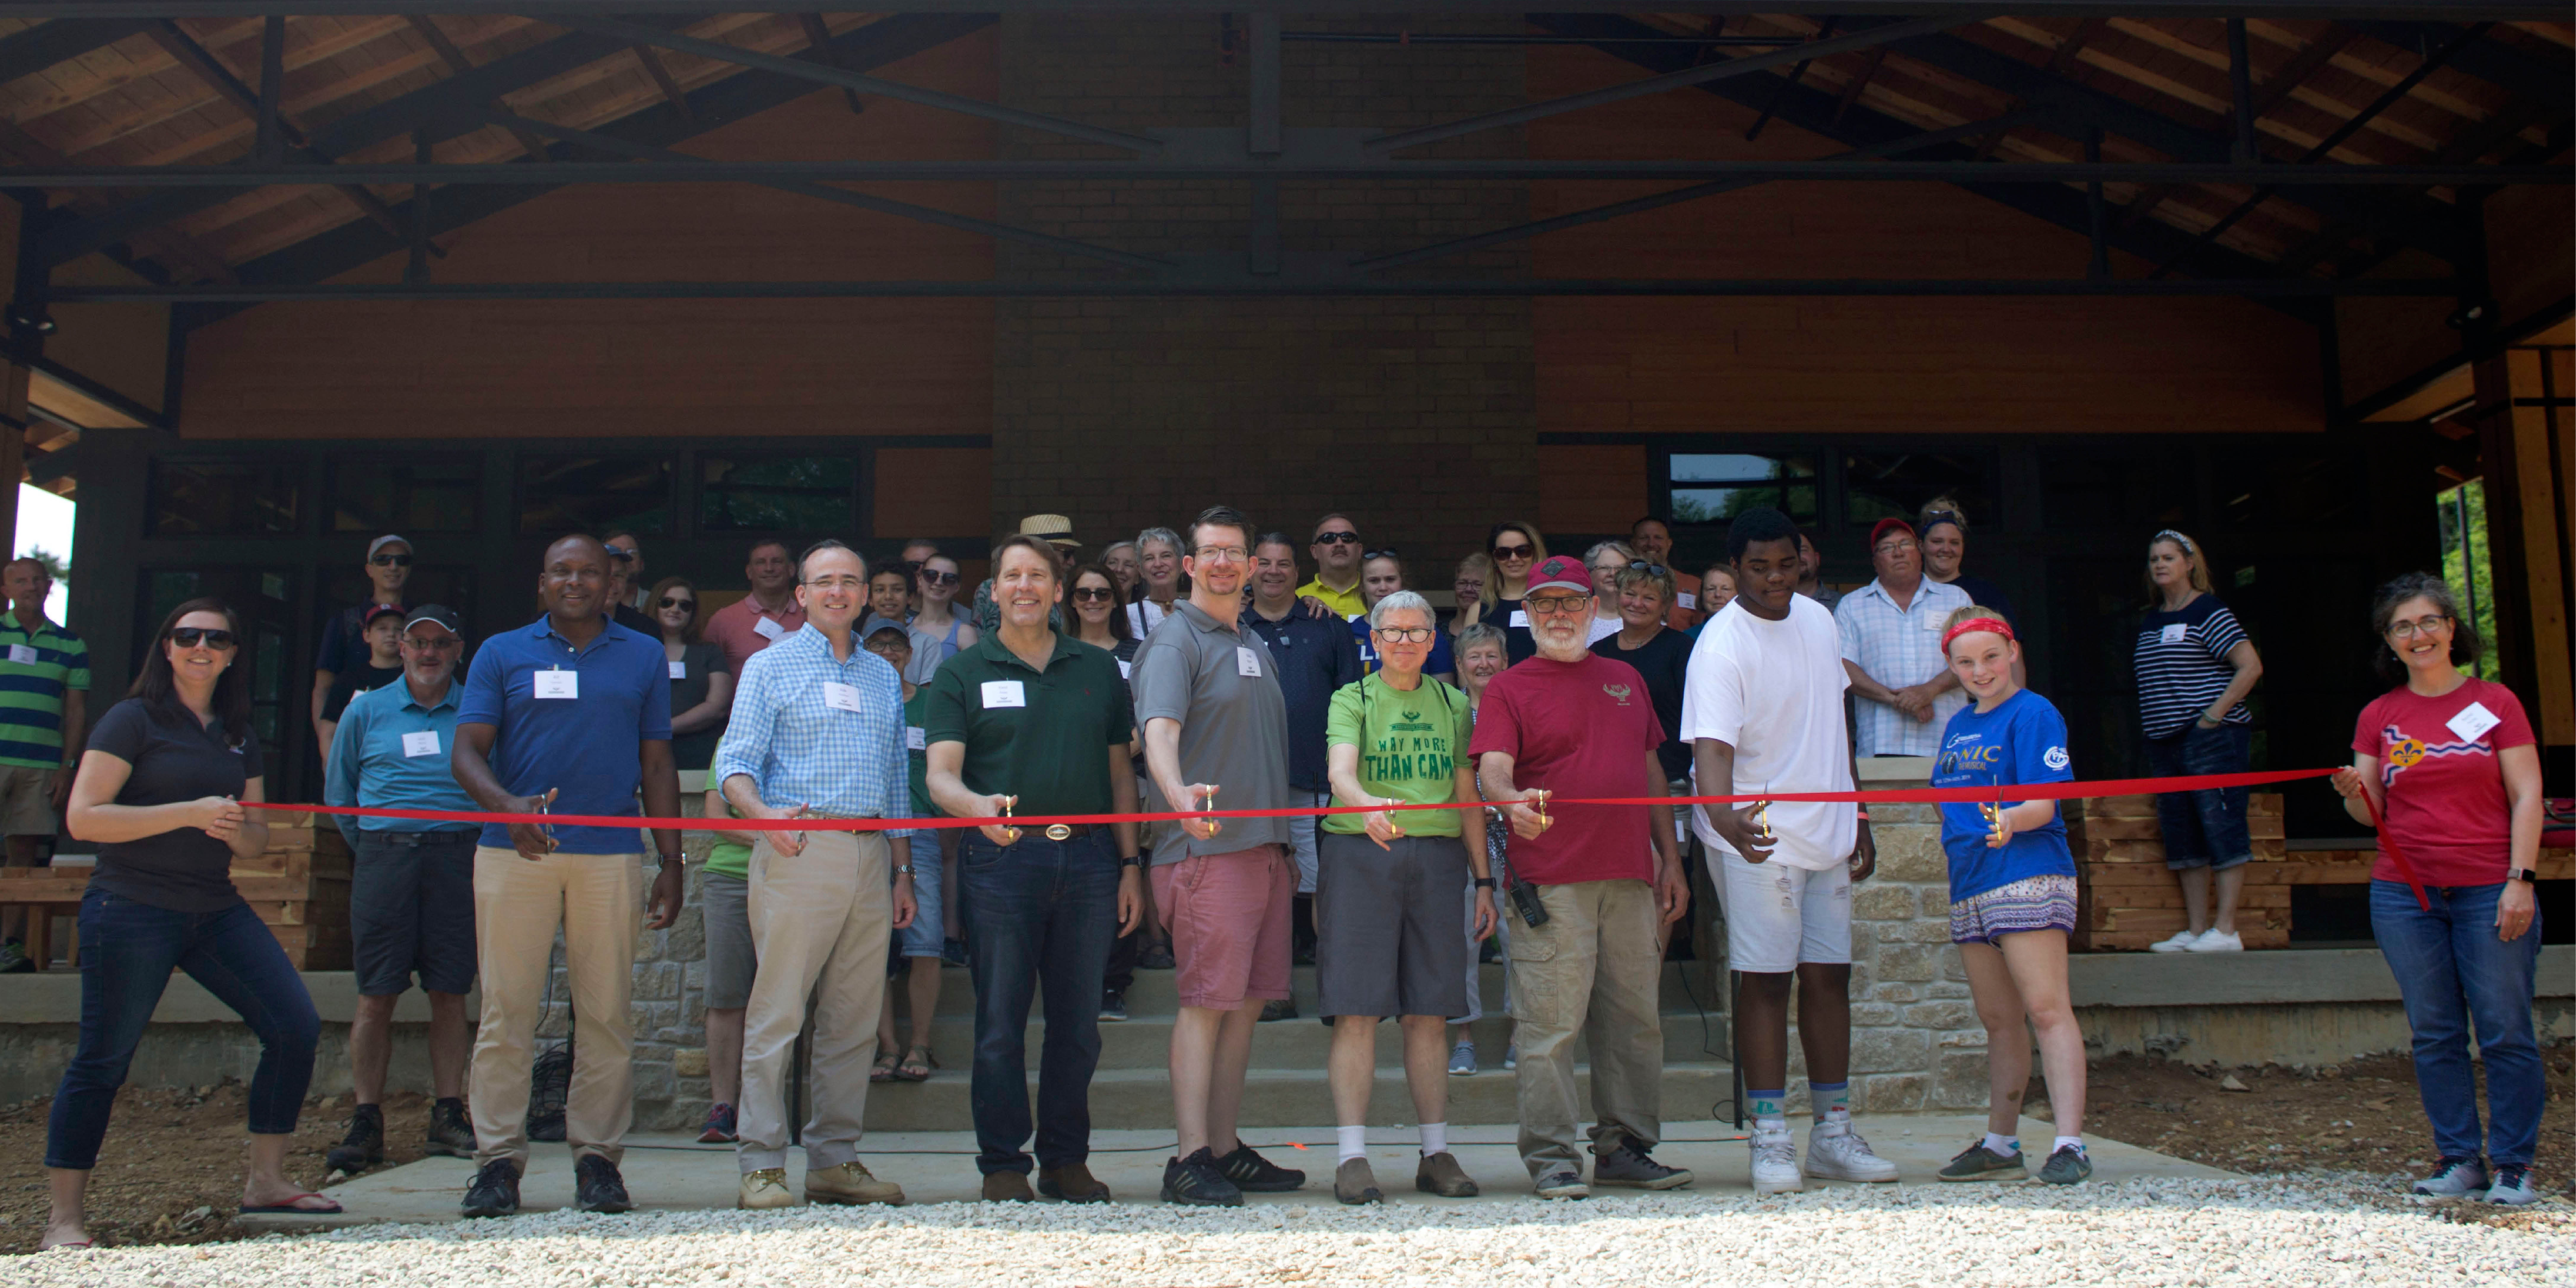 Way More Than Camp Ribbon Cutting Ceremony